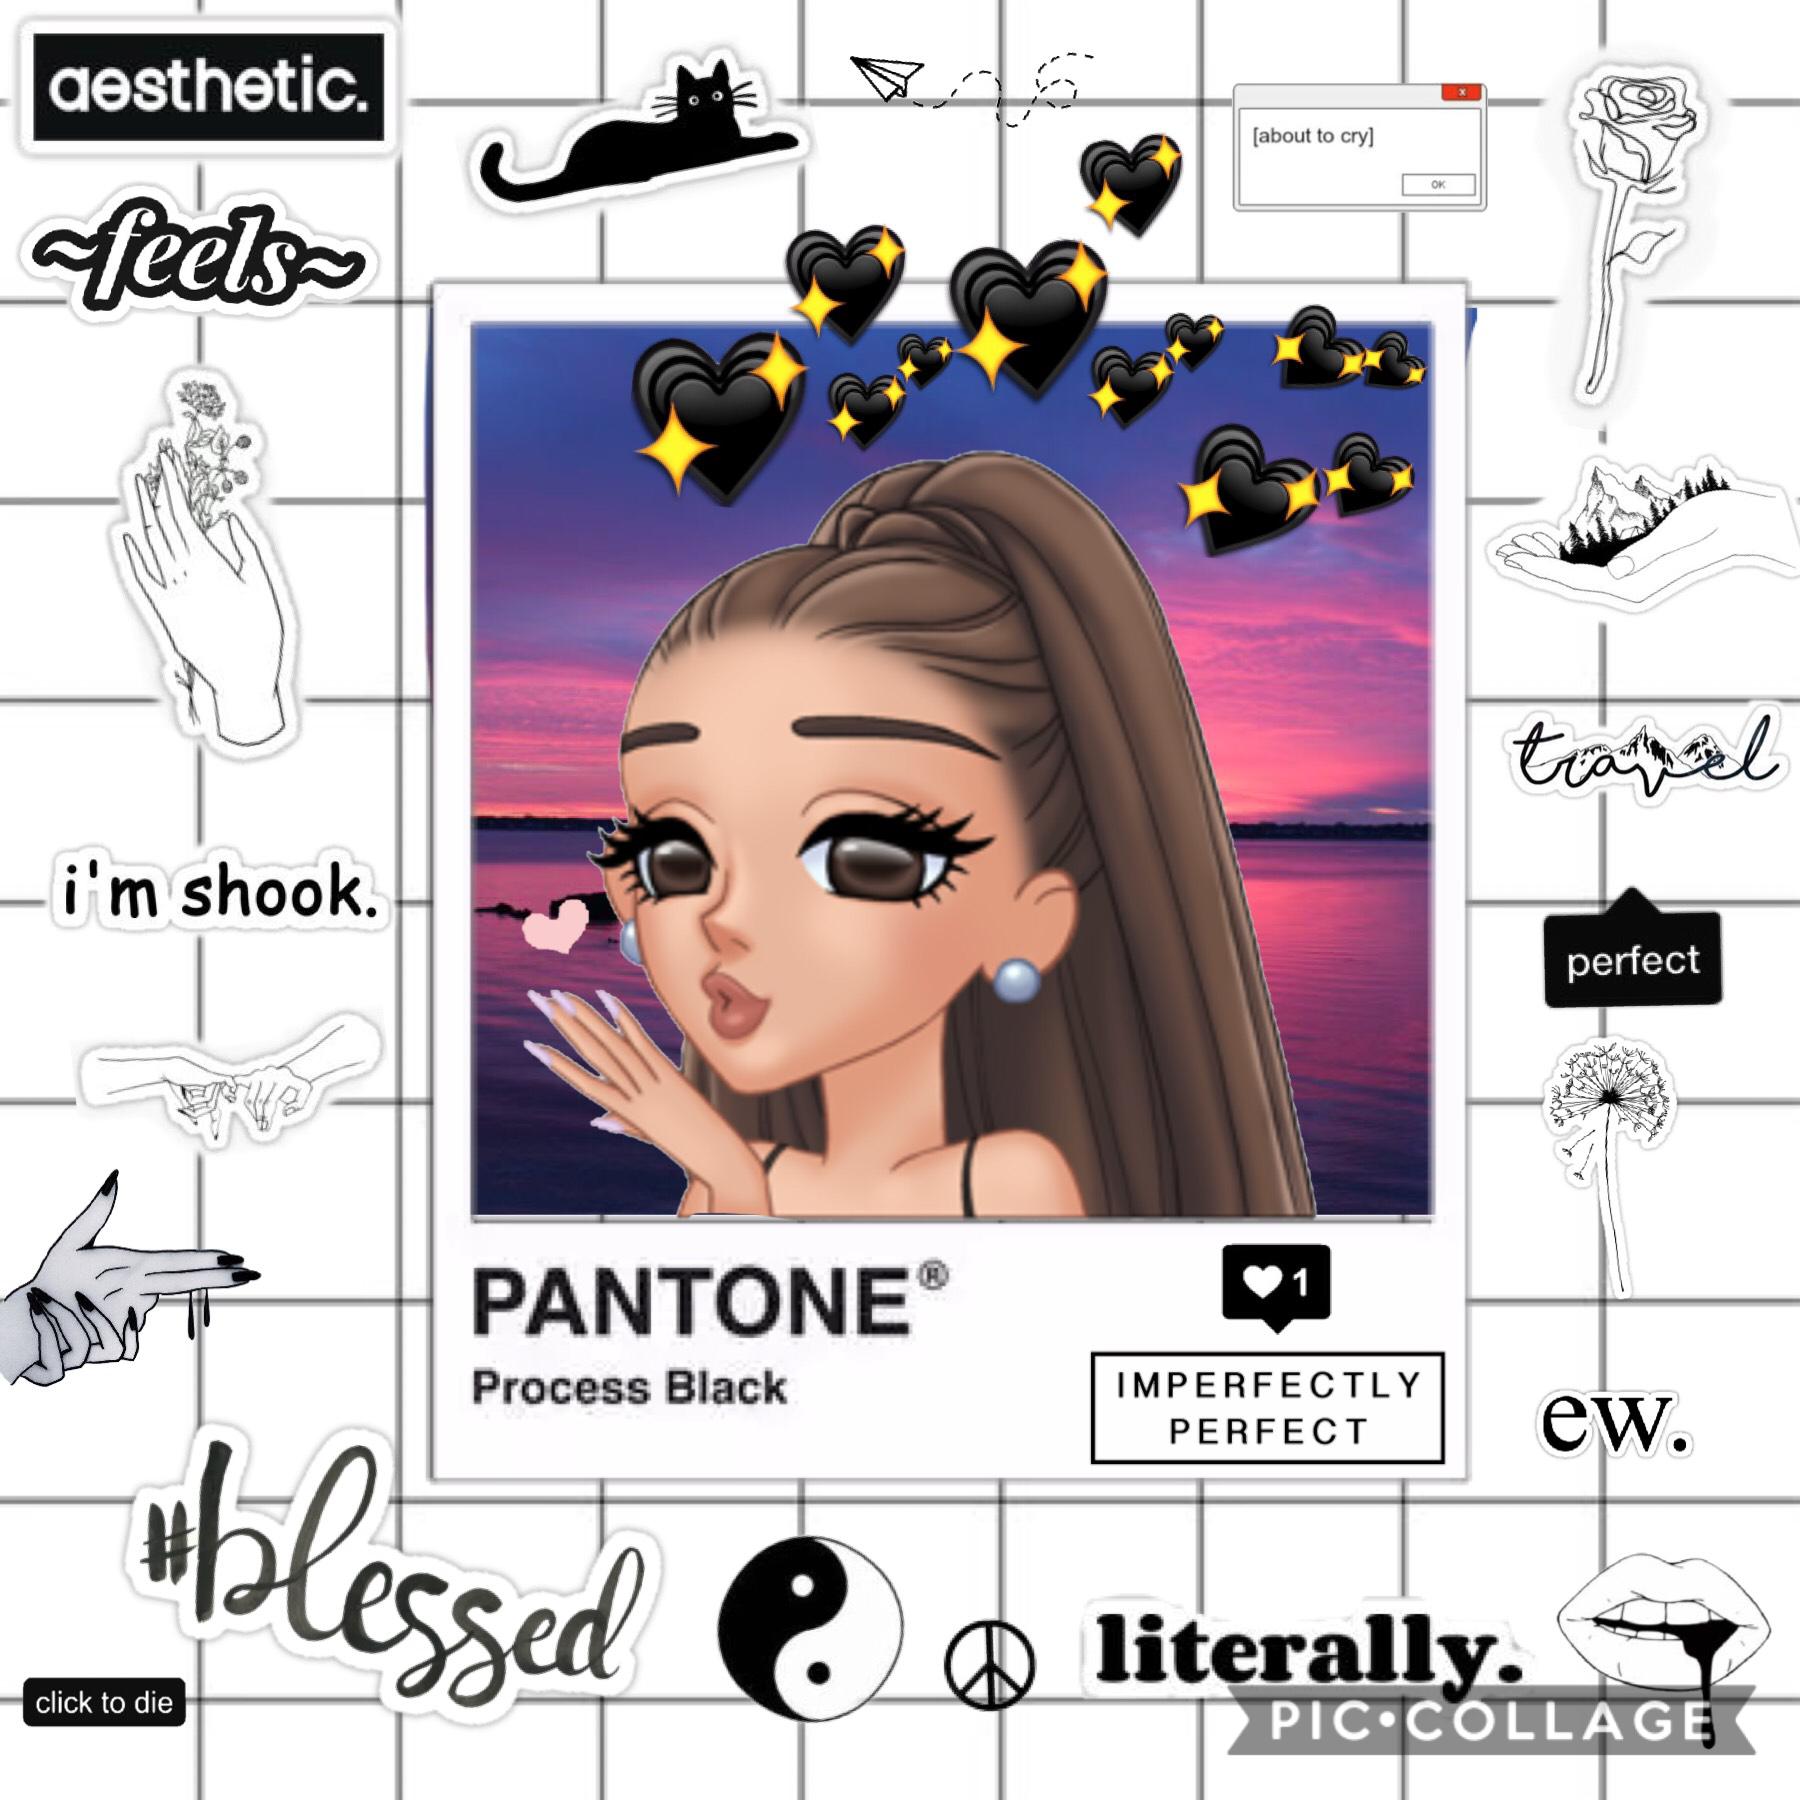 Hey can everyone that see’s this pls like and follow! I try to make my best collages!